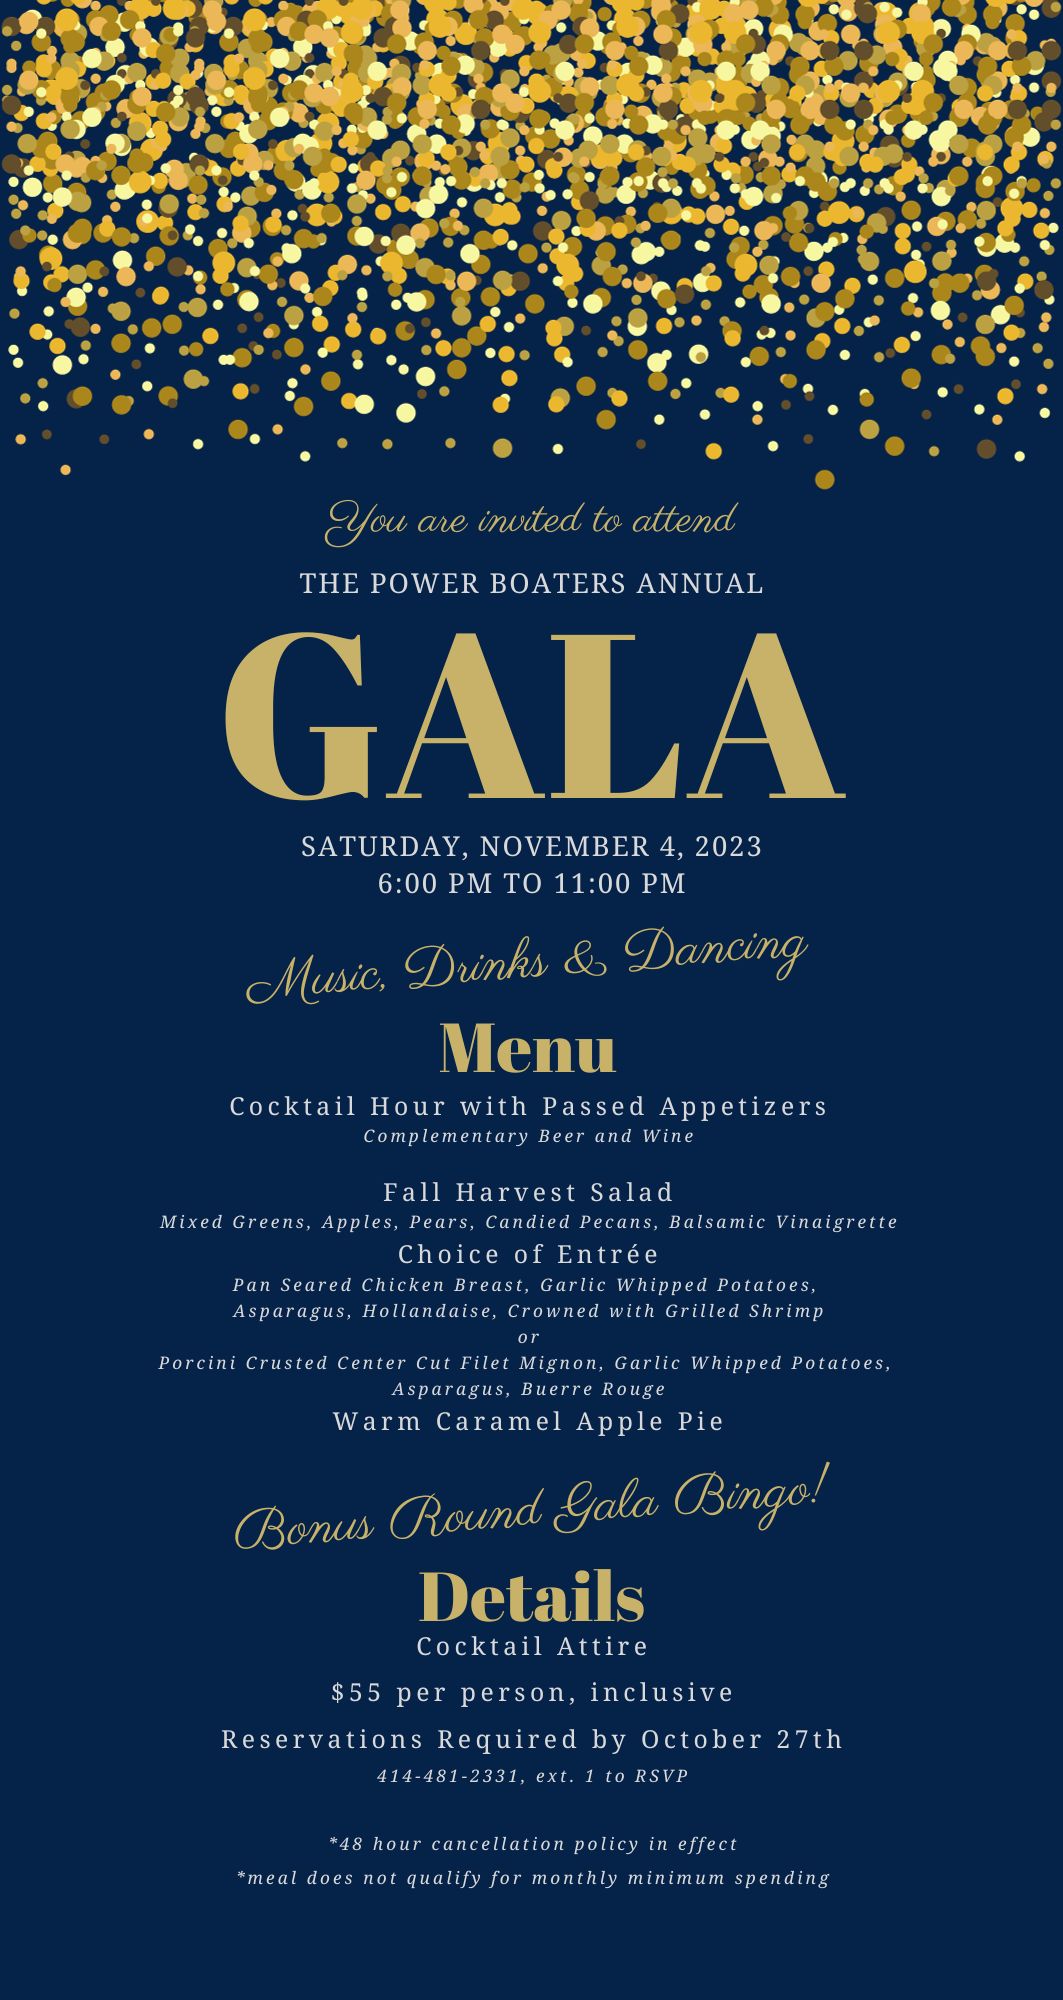 All Aboard! Power Boater's Gala on November 4th, 2023 - RSVP Now